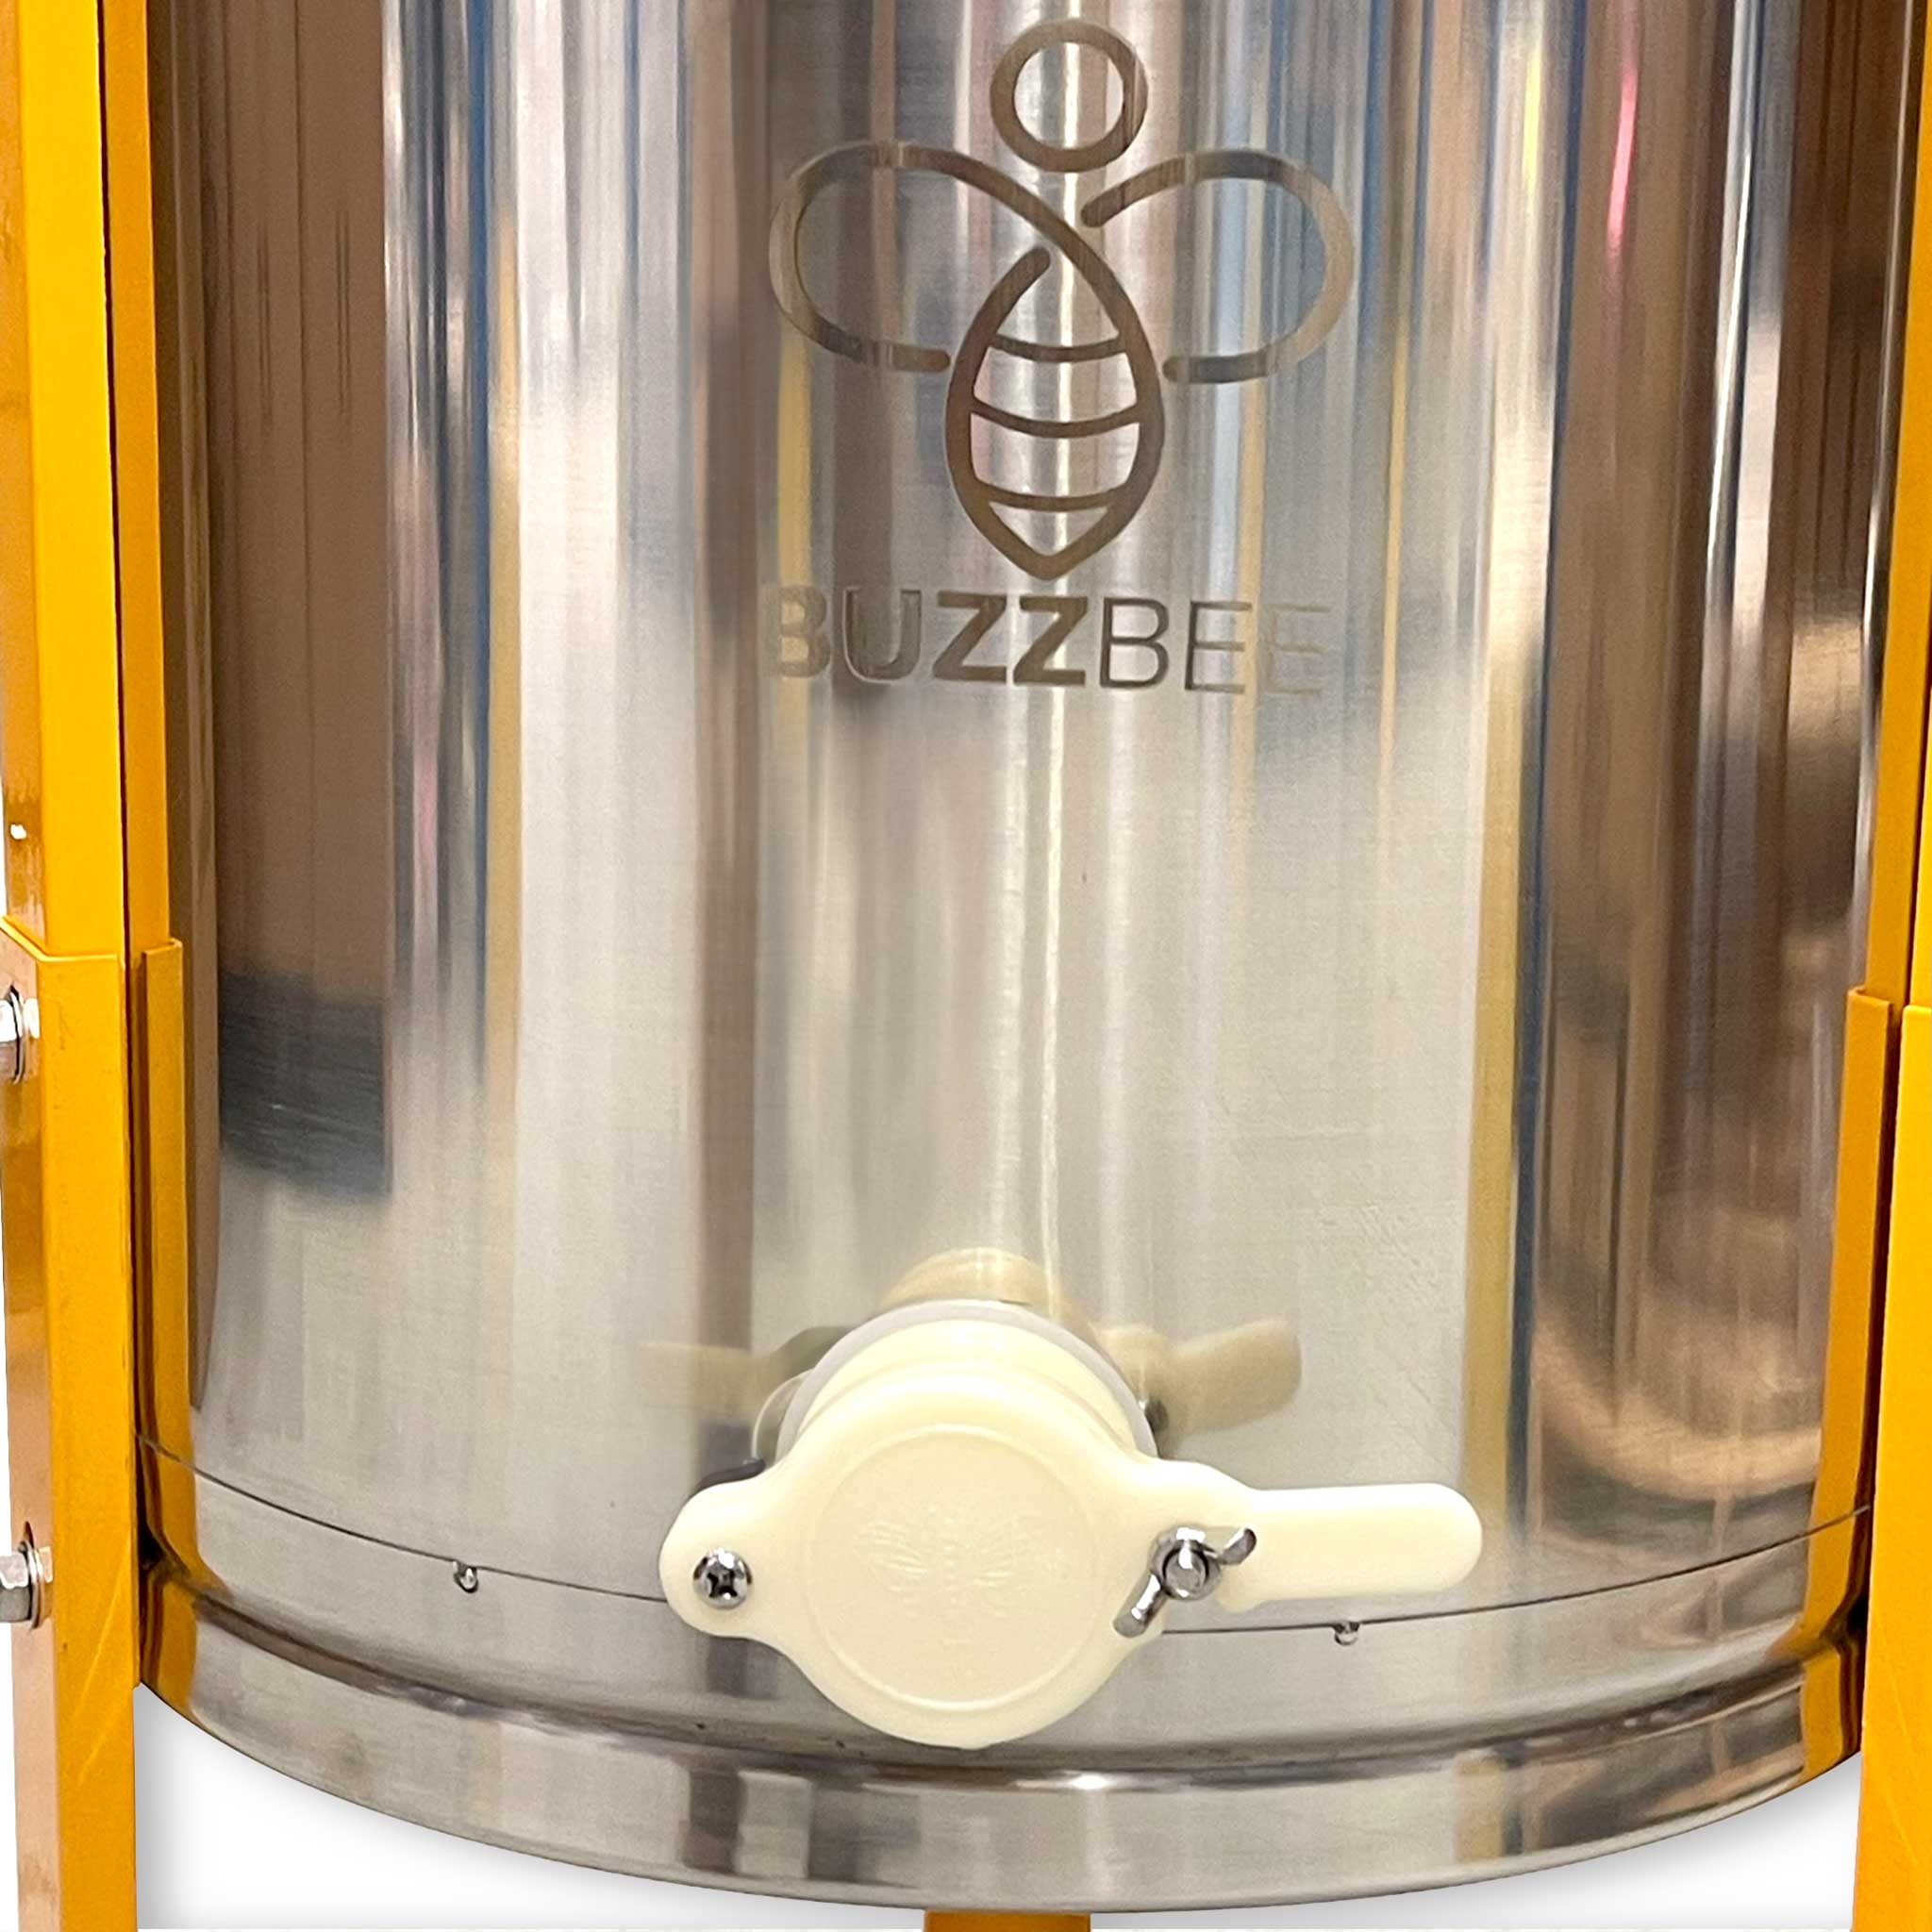 Buzzbee 2 Frame Manual Stainless Steel Honey Extractor with Emergency Break System - Honey Extractor collection by Buzzbee Beekeeping Supplies